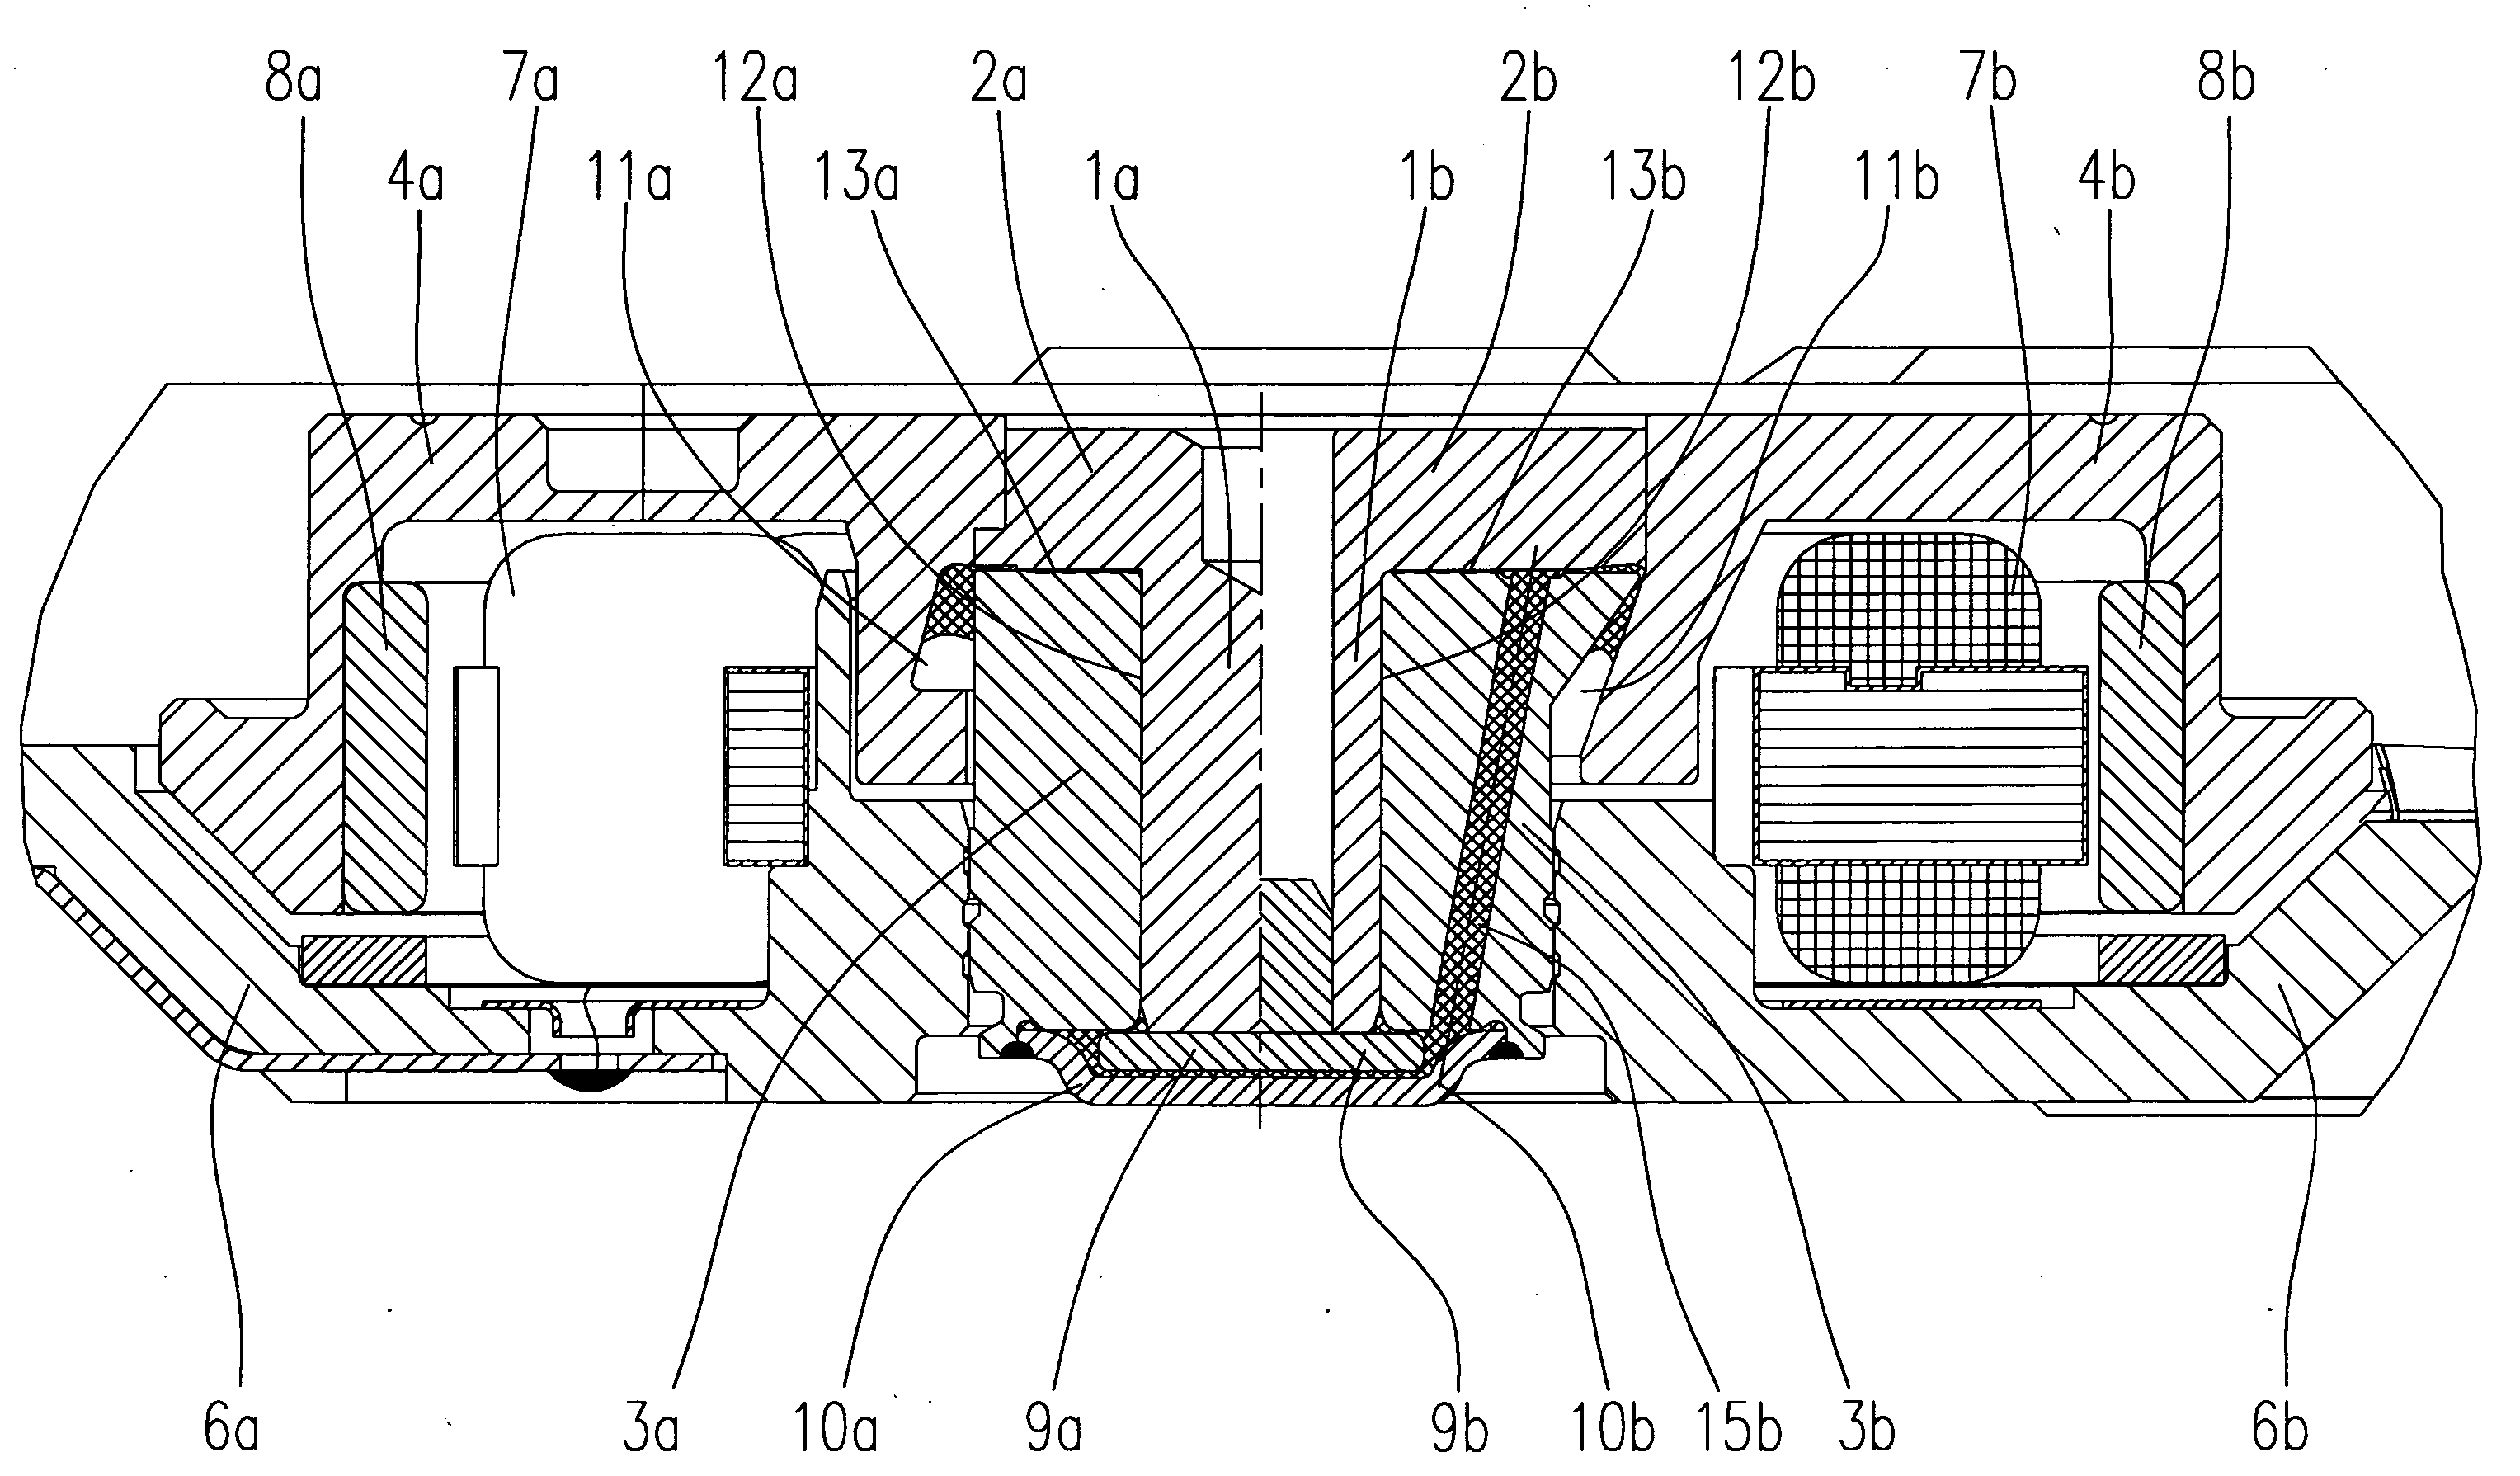 Spindle motor having a fluid dynamic bearing system